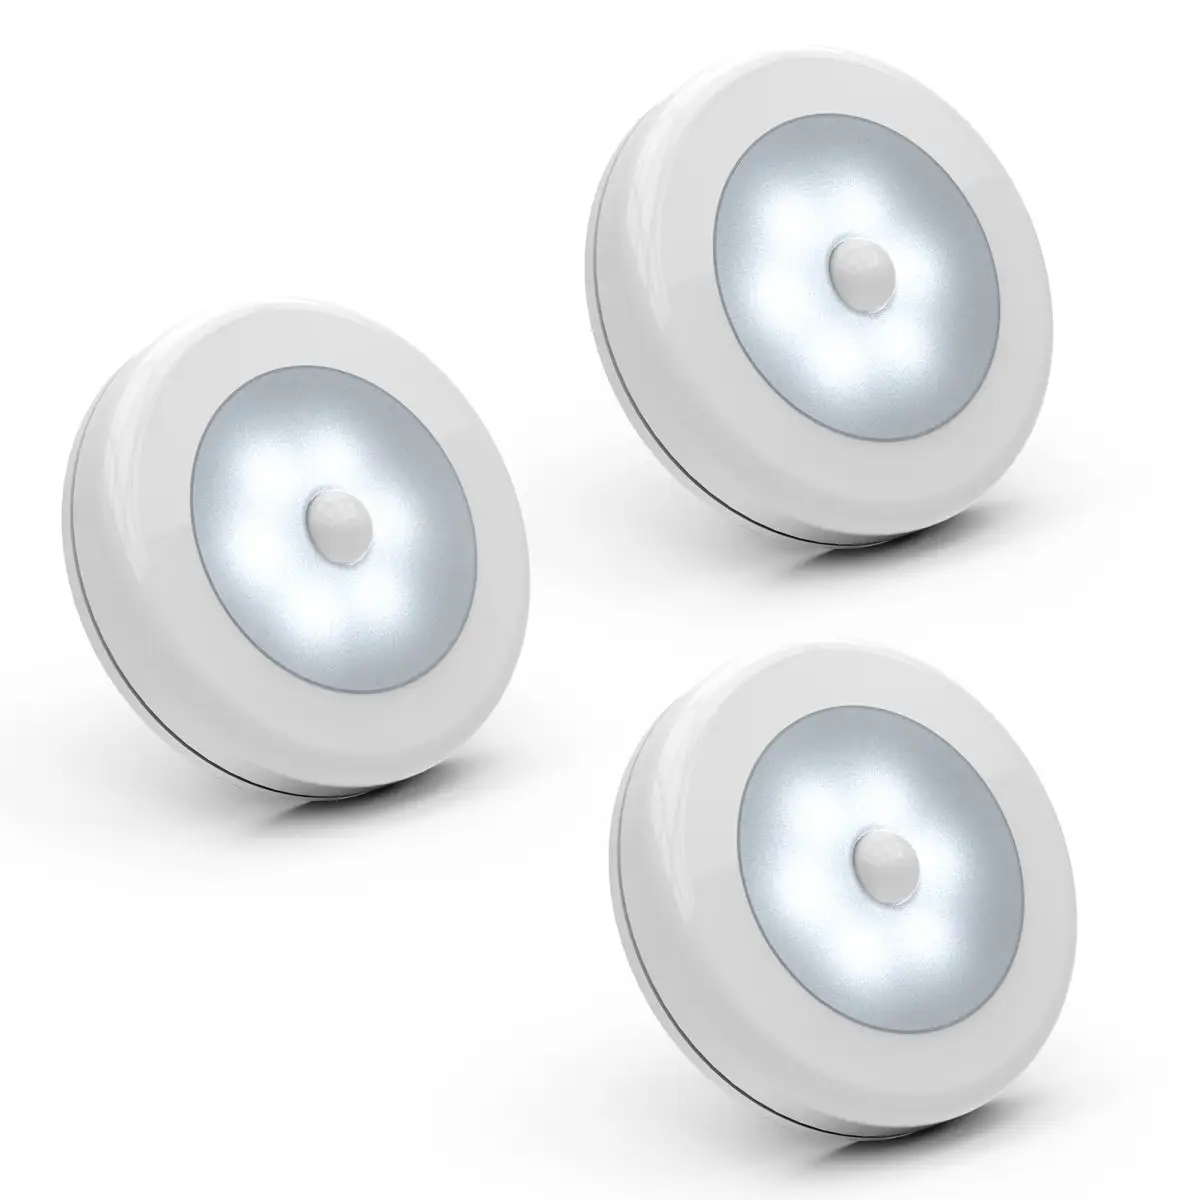 Stick On Anywhere Magnetic Warm White Puck Lamp Removable Battery Portable LED Night Light Sensor